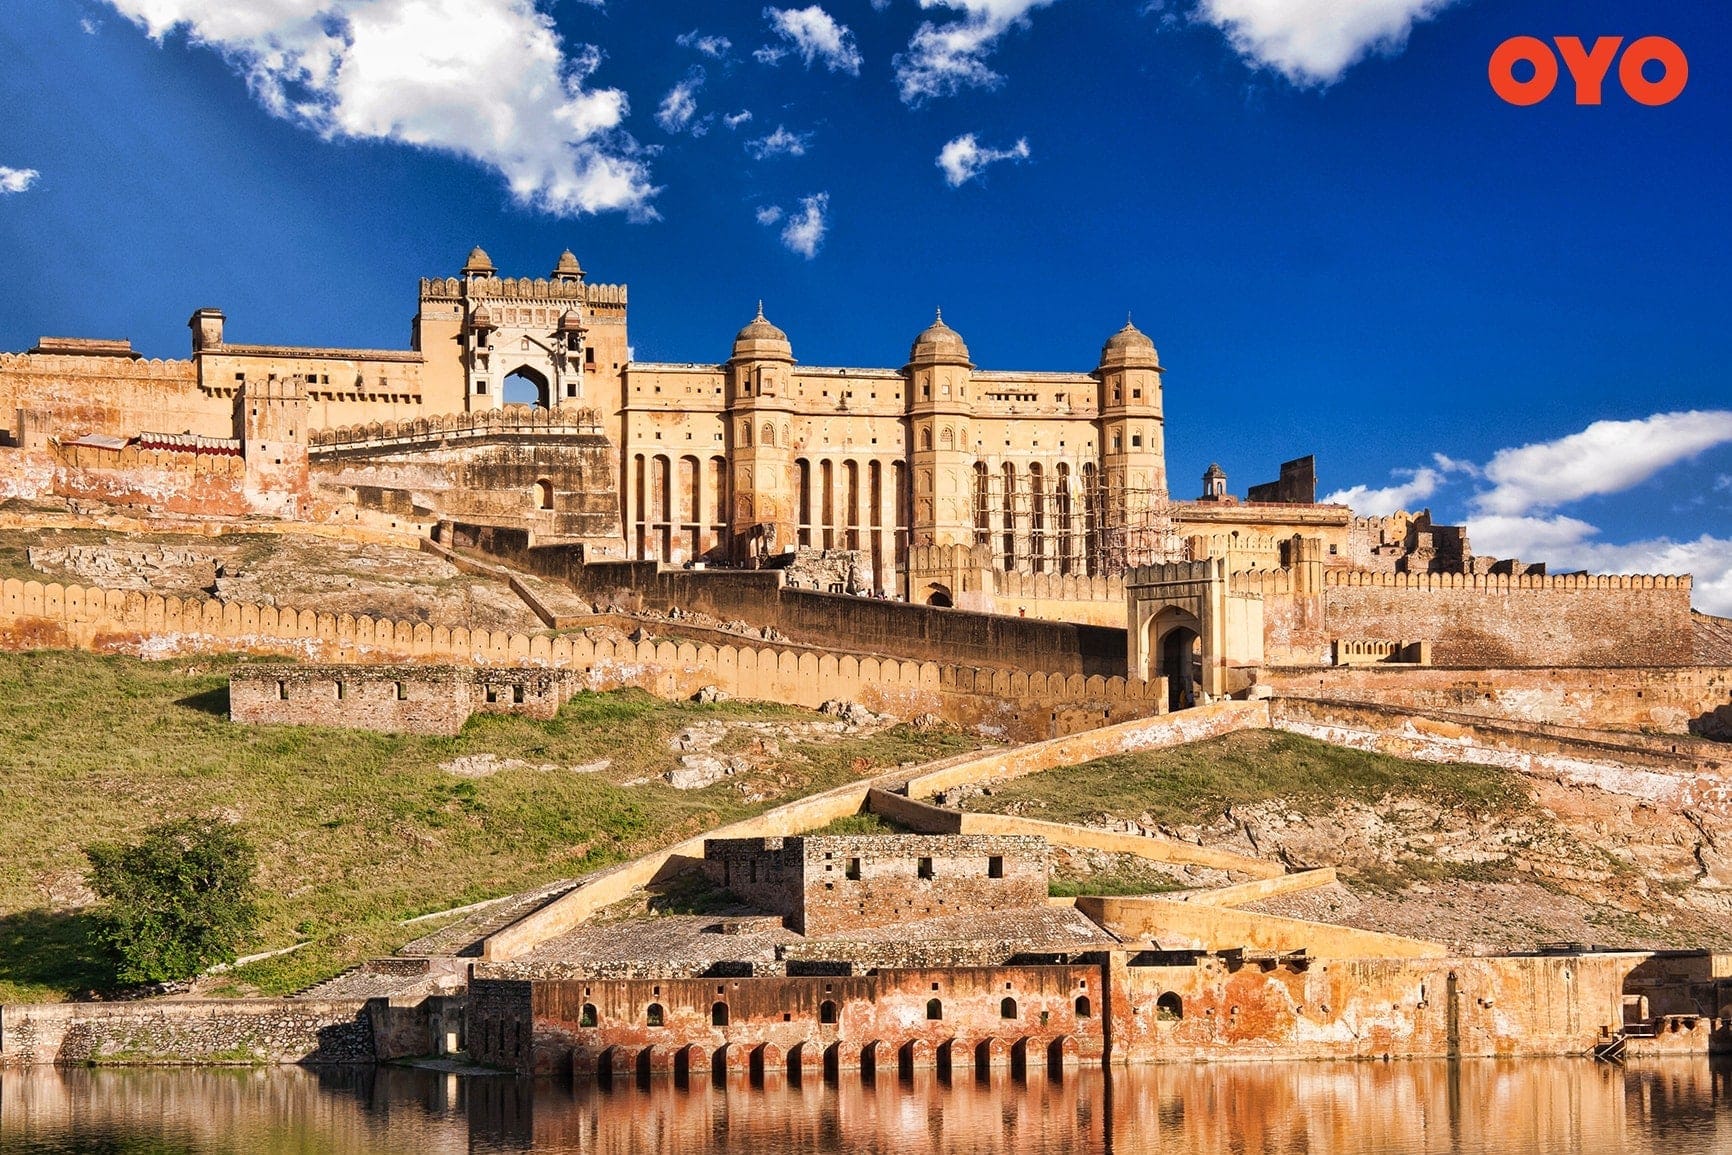 Amer Fort, Rajasthan - one of the most famous historical monuments in India